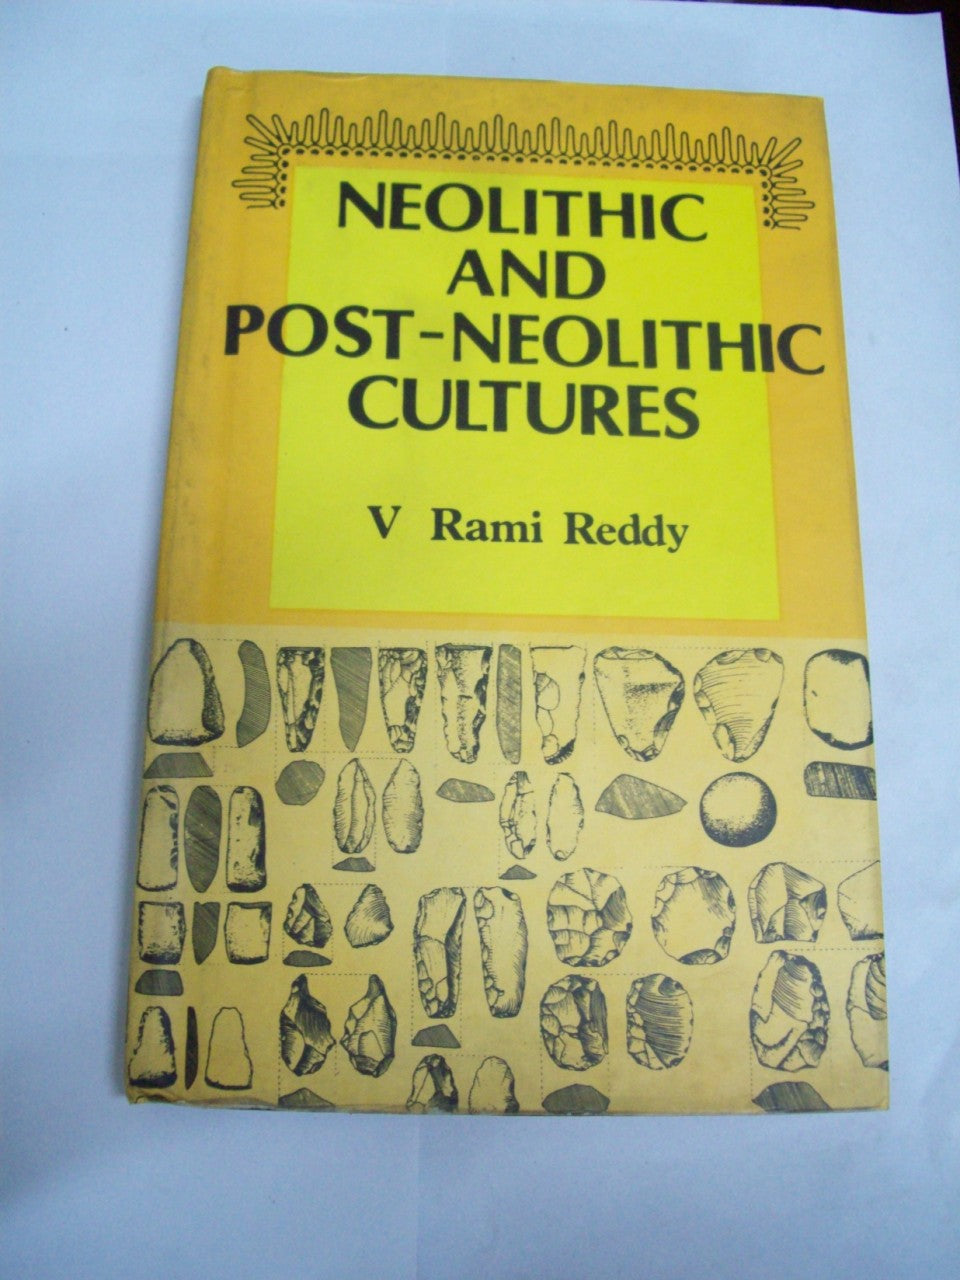 Neolithic And Post-Neolithic Cultures